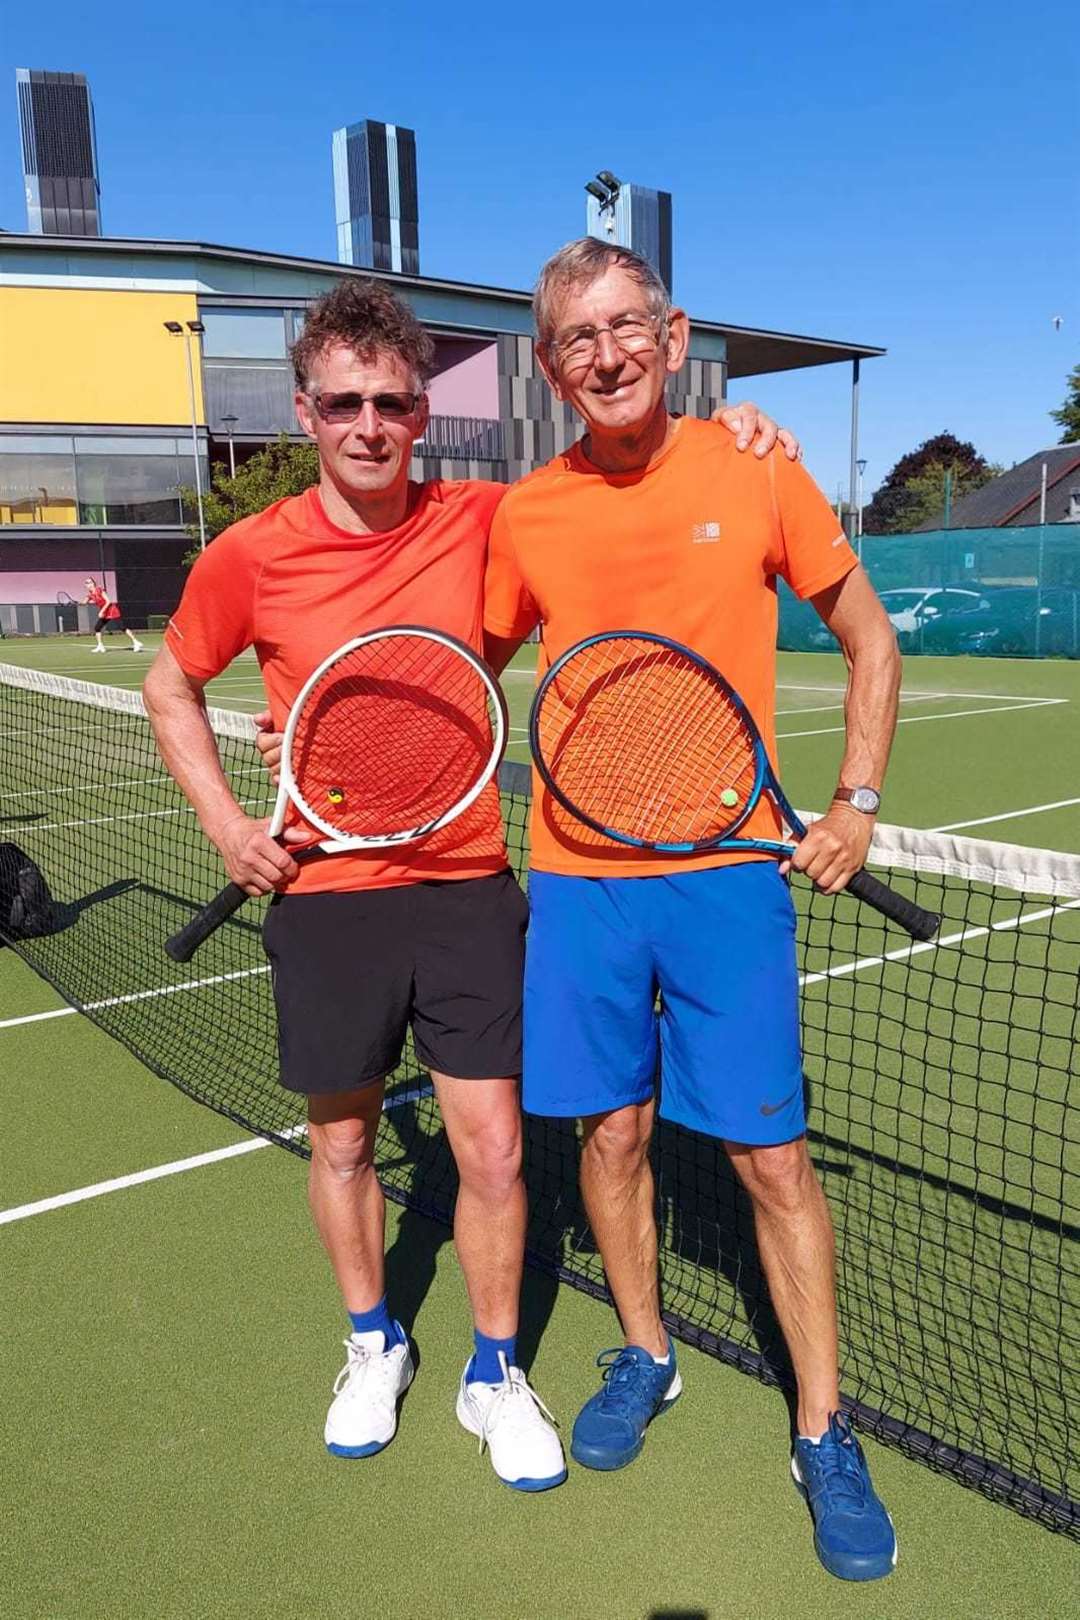 Brian Mackenzie beat Brian Dent 6-1, 6-3 in the men's over-50 final of the Inverness Tennis Club Championships.